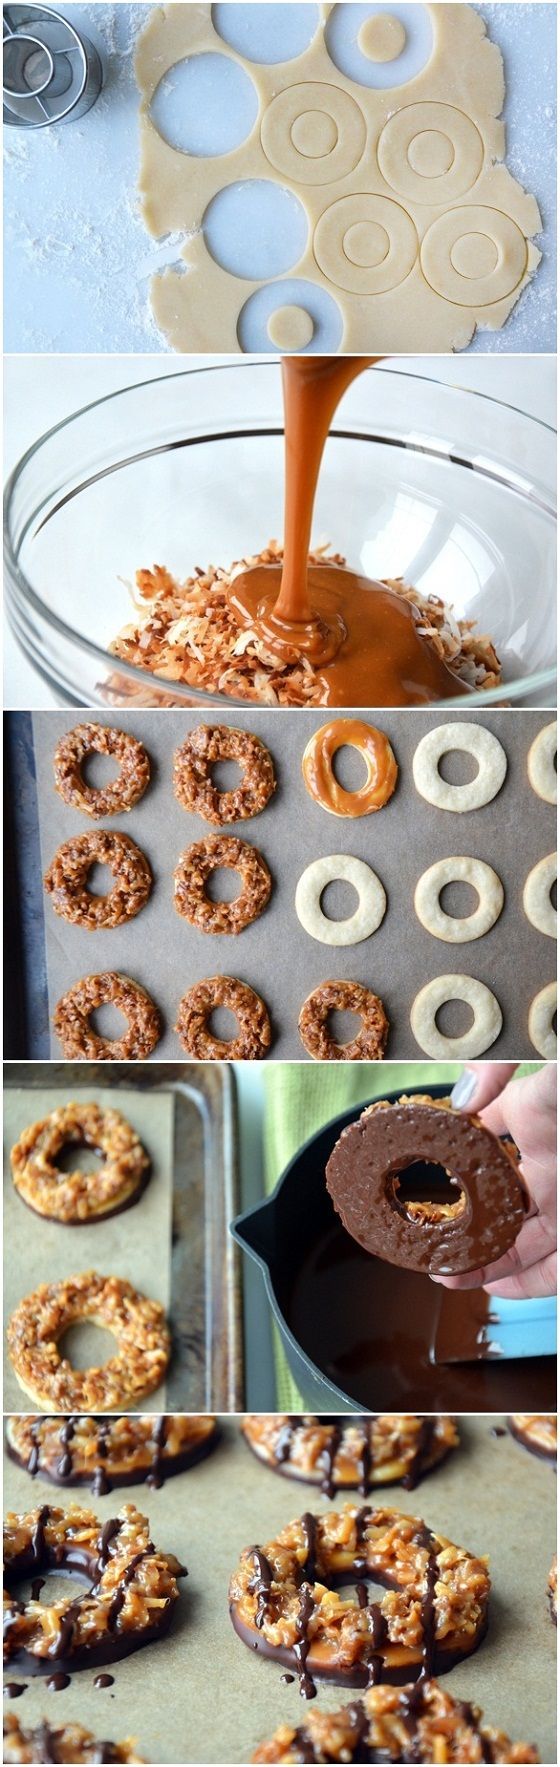 Homemade Caramel Delites Girl Scout cookies!! (this is what they were called when I was a Girl